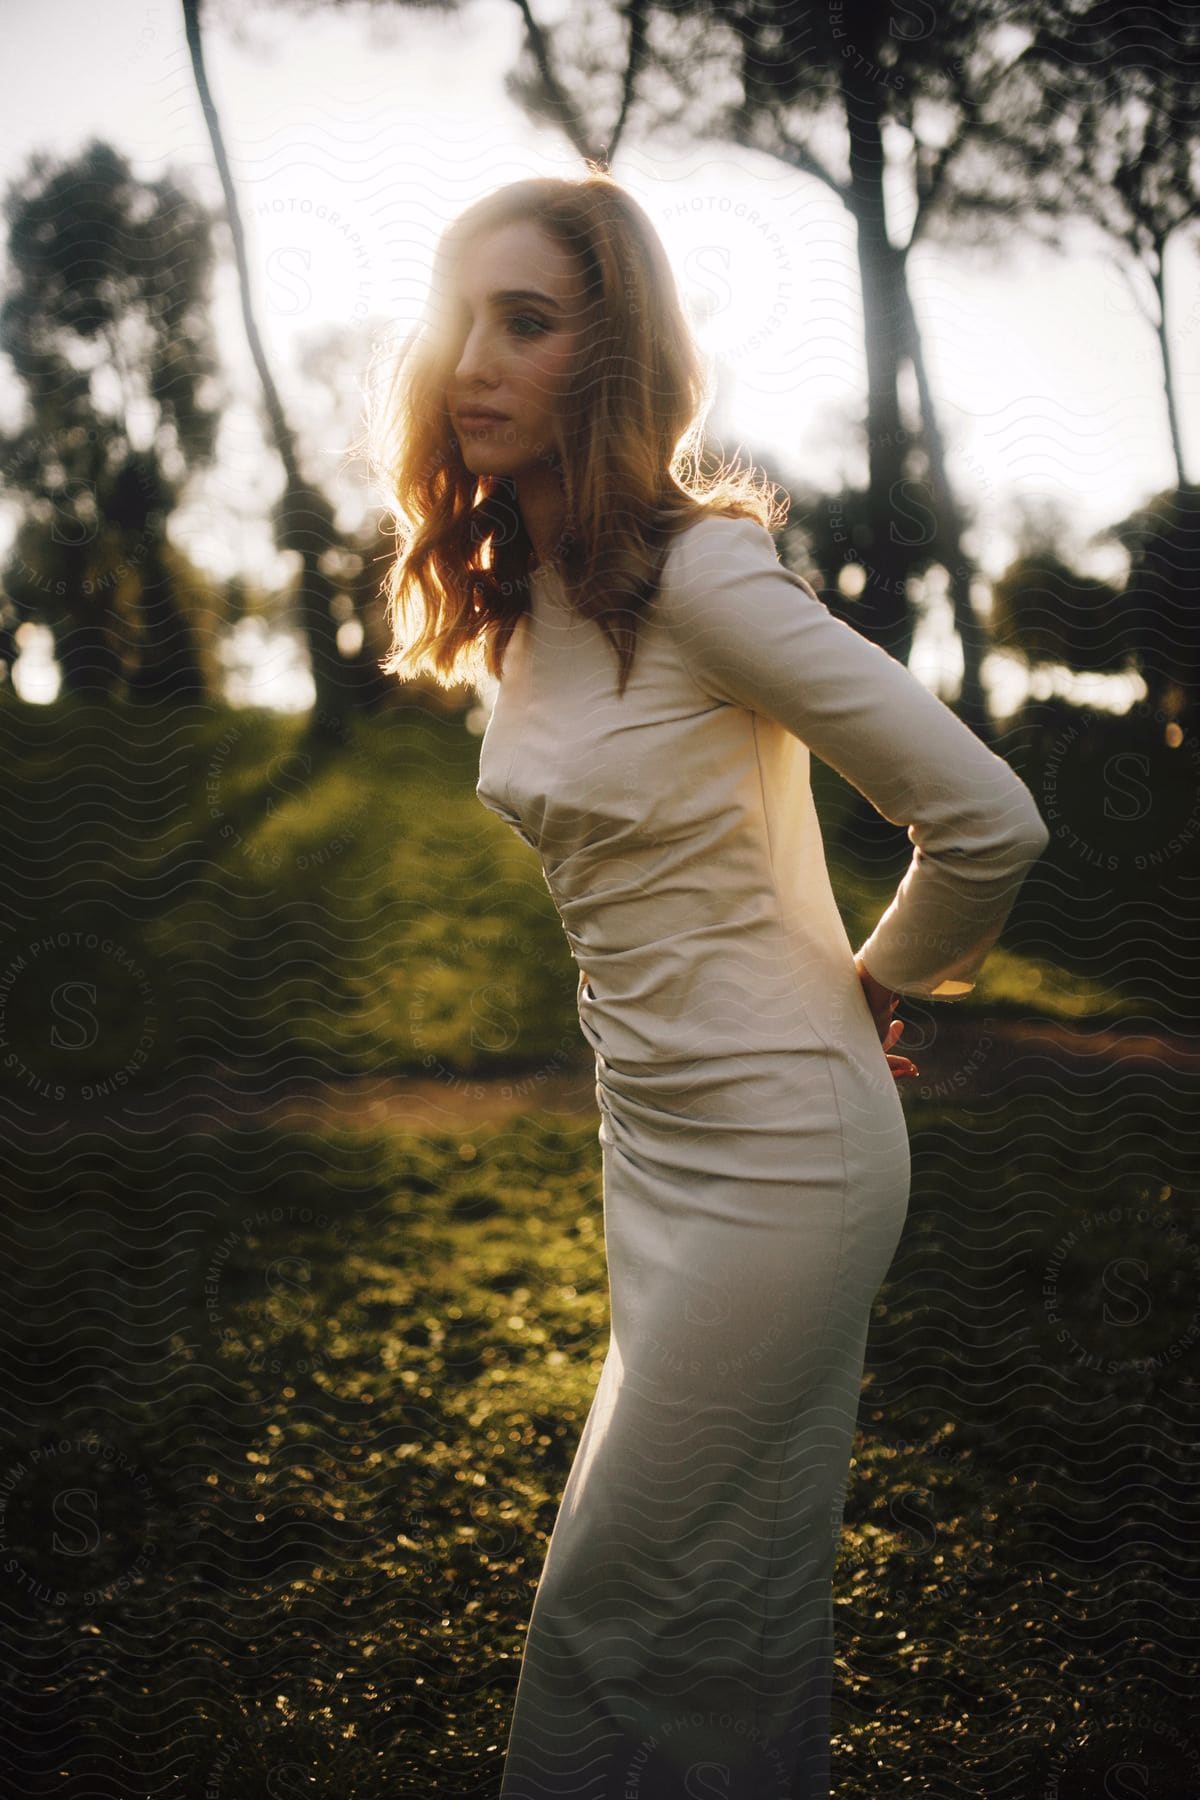 Woman in a white dress posing in a forest at sunset.